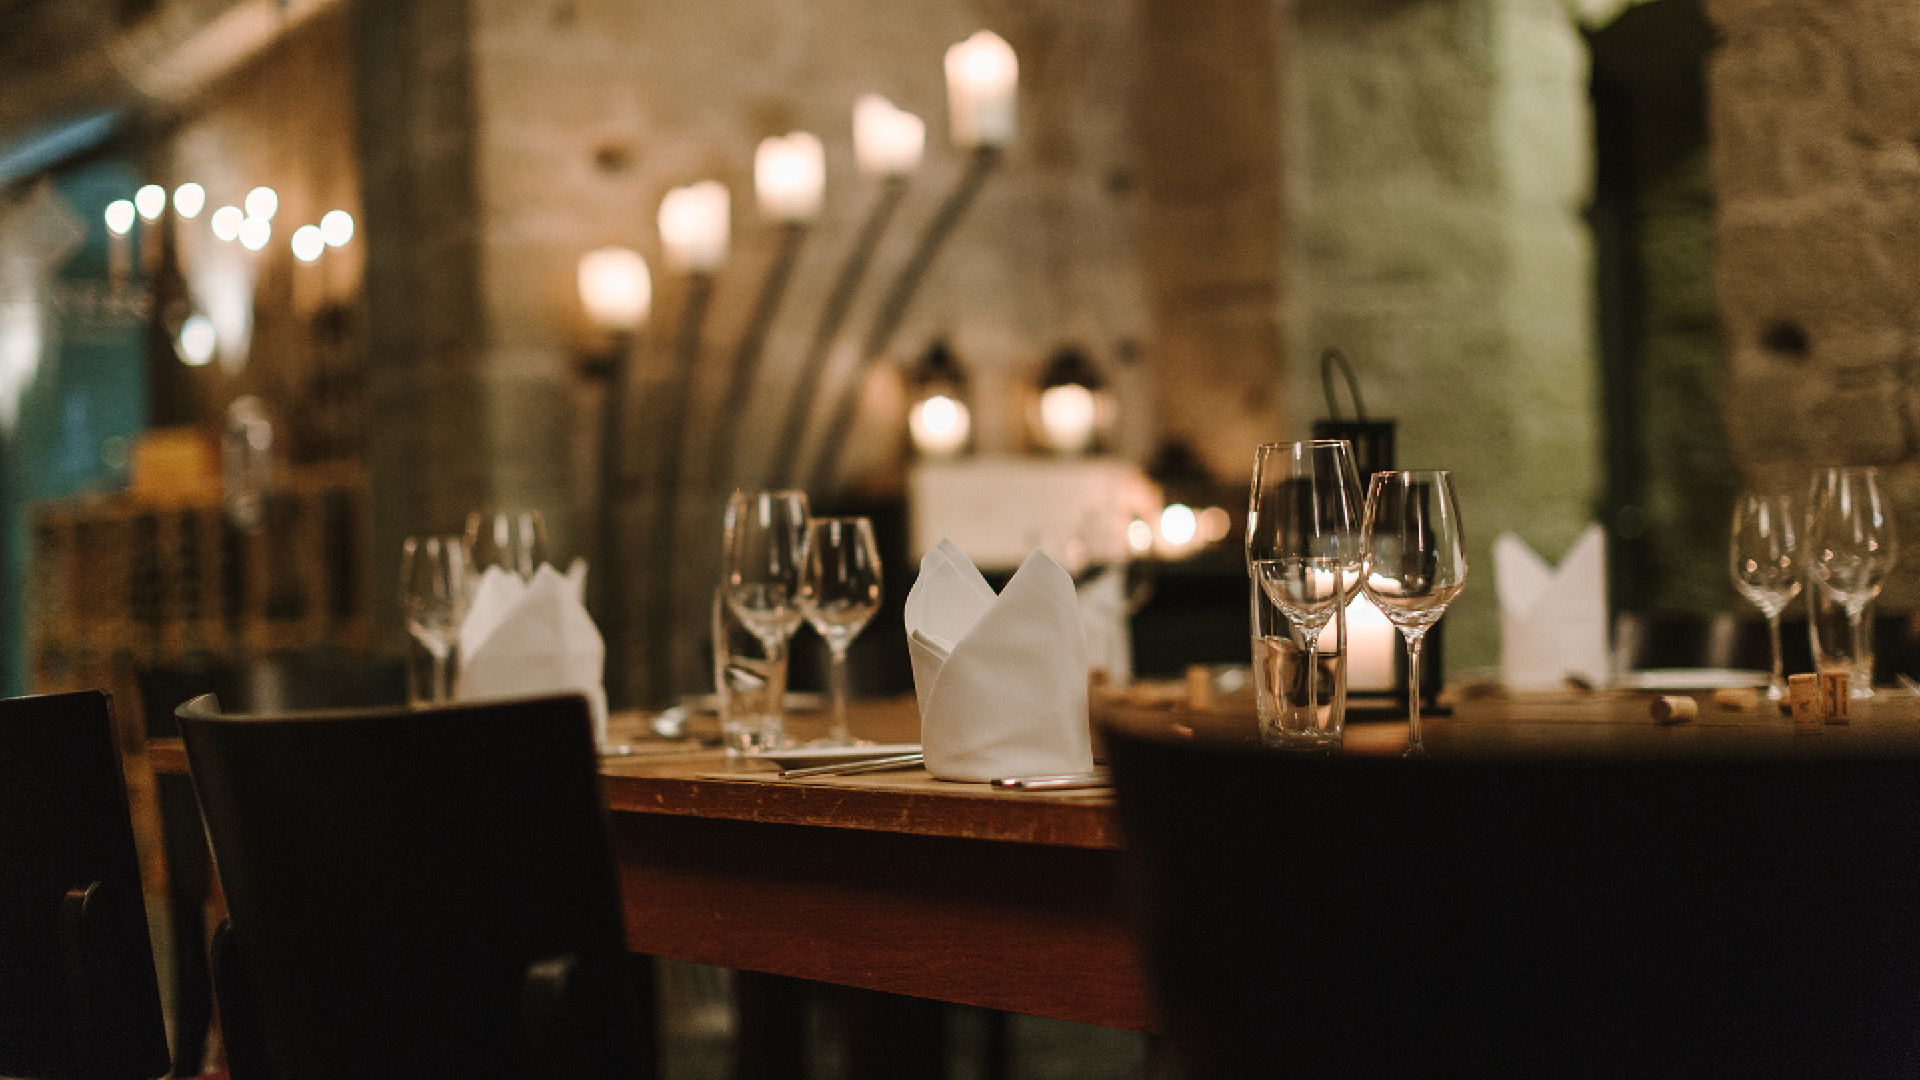 Festively laid table in the vaulted cellar with candles in the background